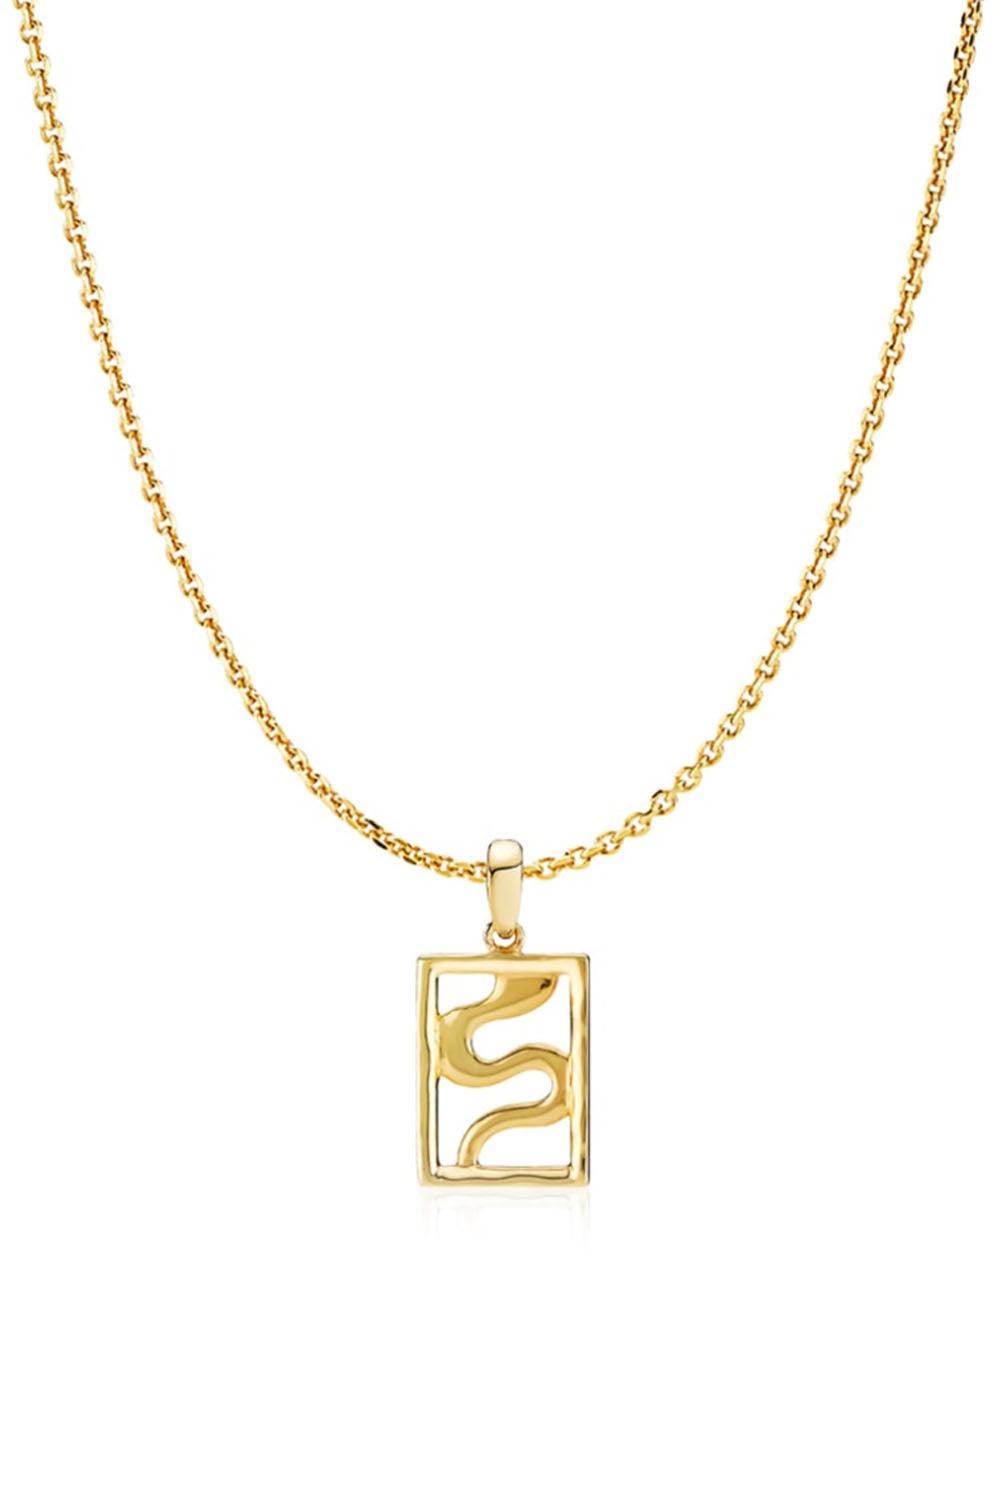 Kathrine Fisker X Sistie Chain with Pendant Gold Plated